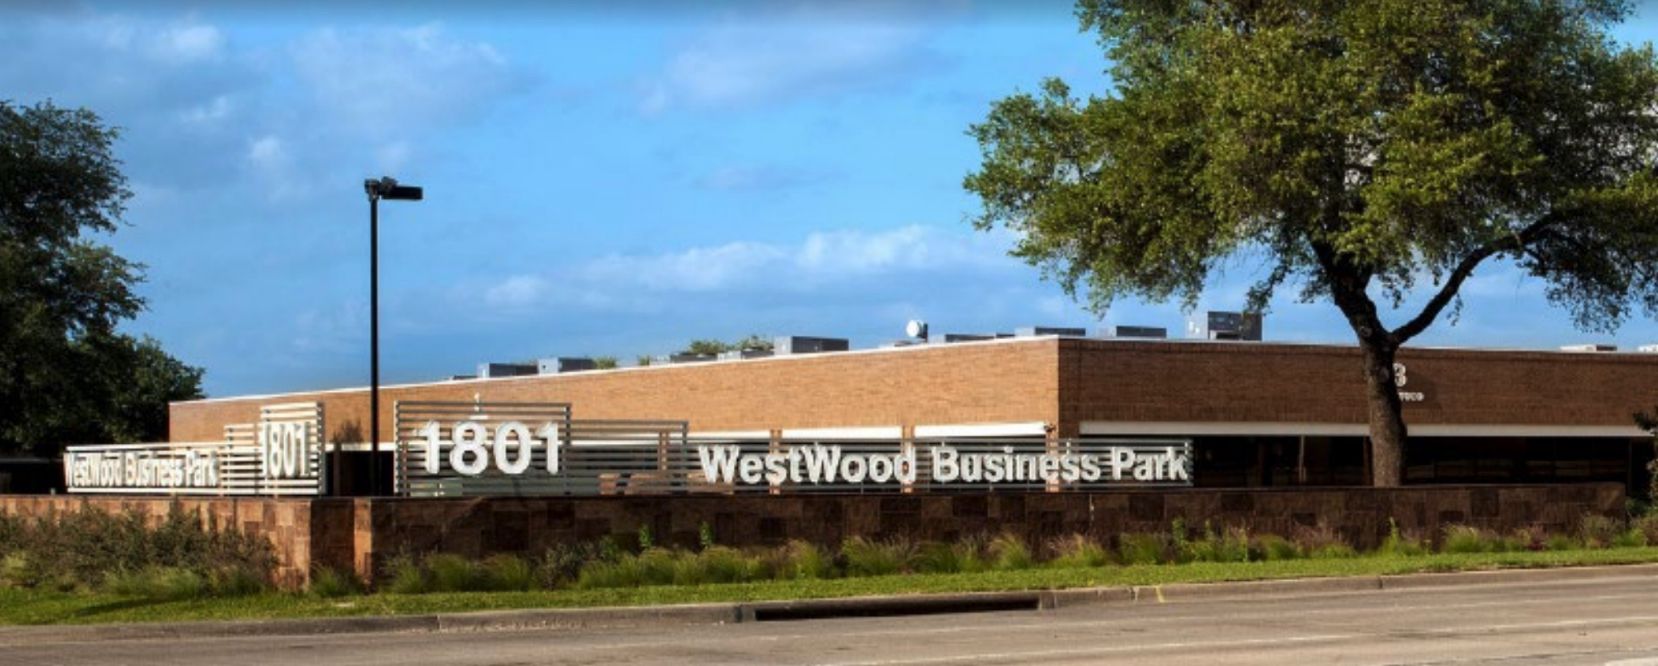 Finial Group bought the WestWood Business Park in Farmers Branch.